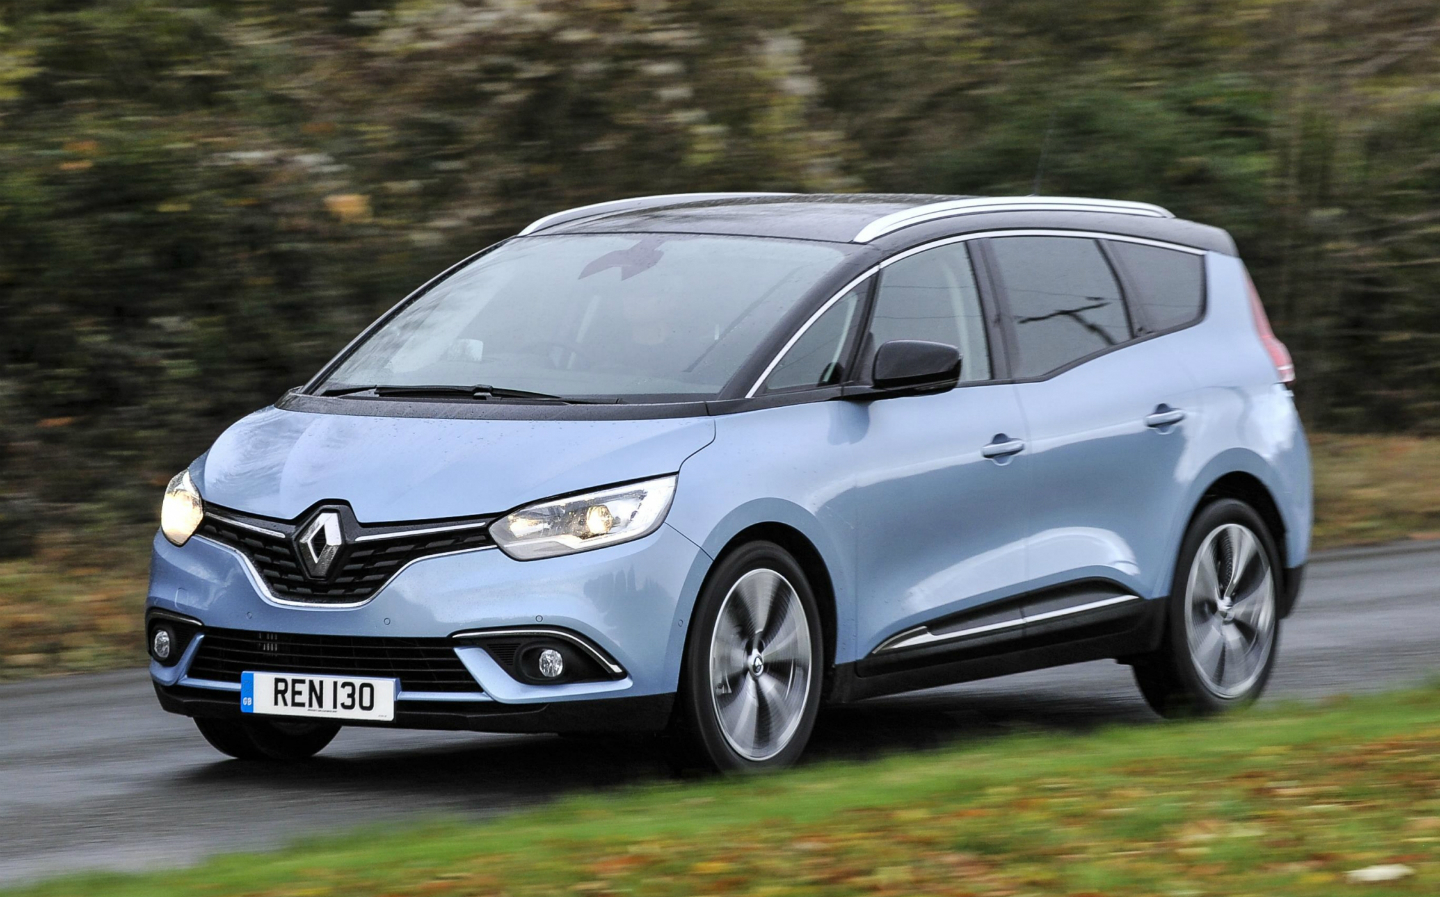 Buying Guide: Best 0% APR finance deals on new cars in 2019